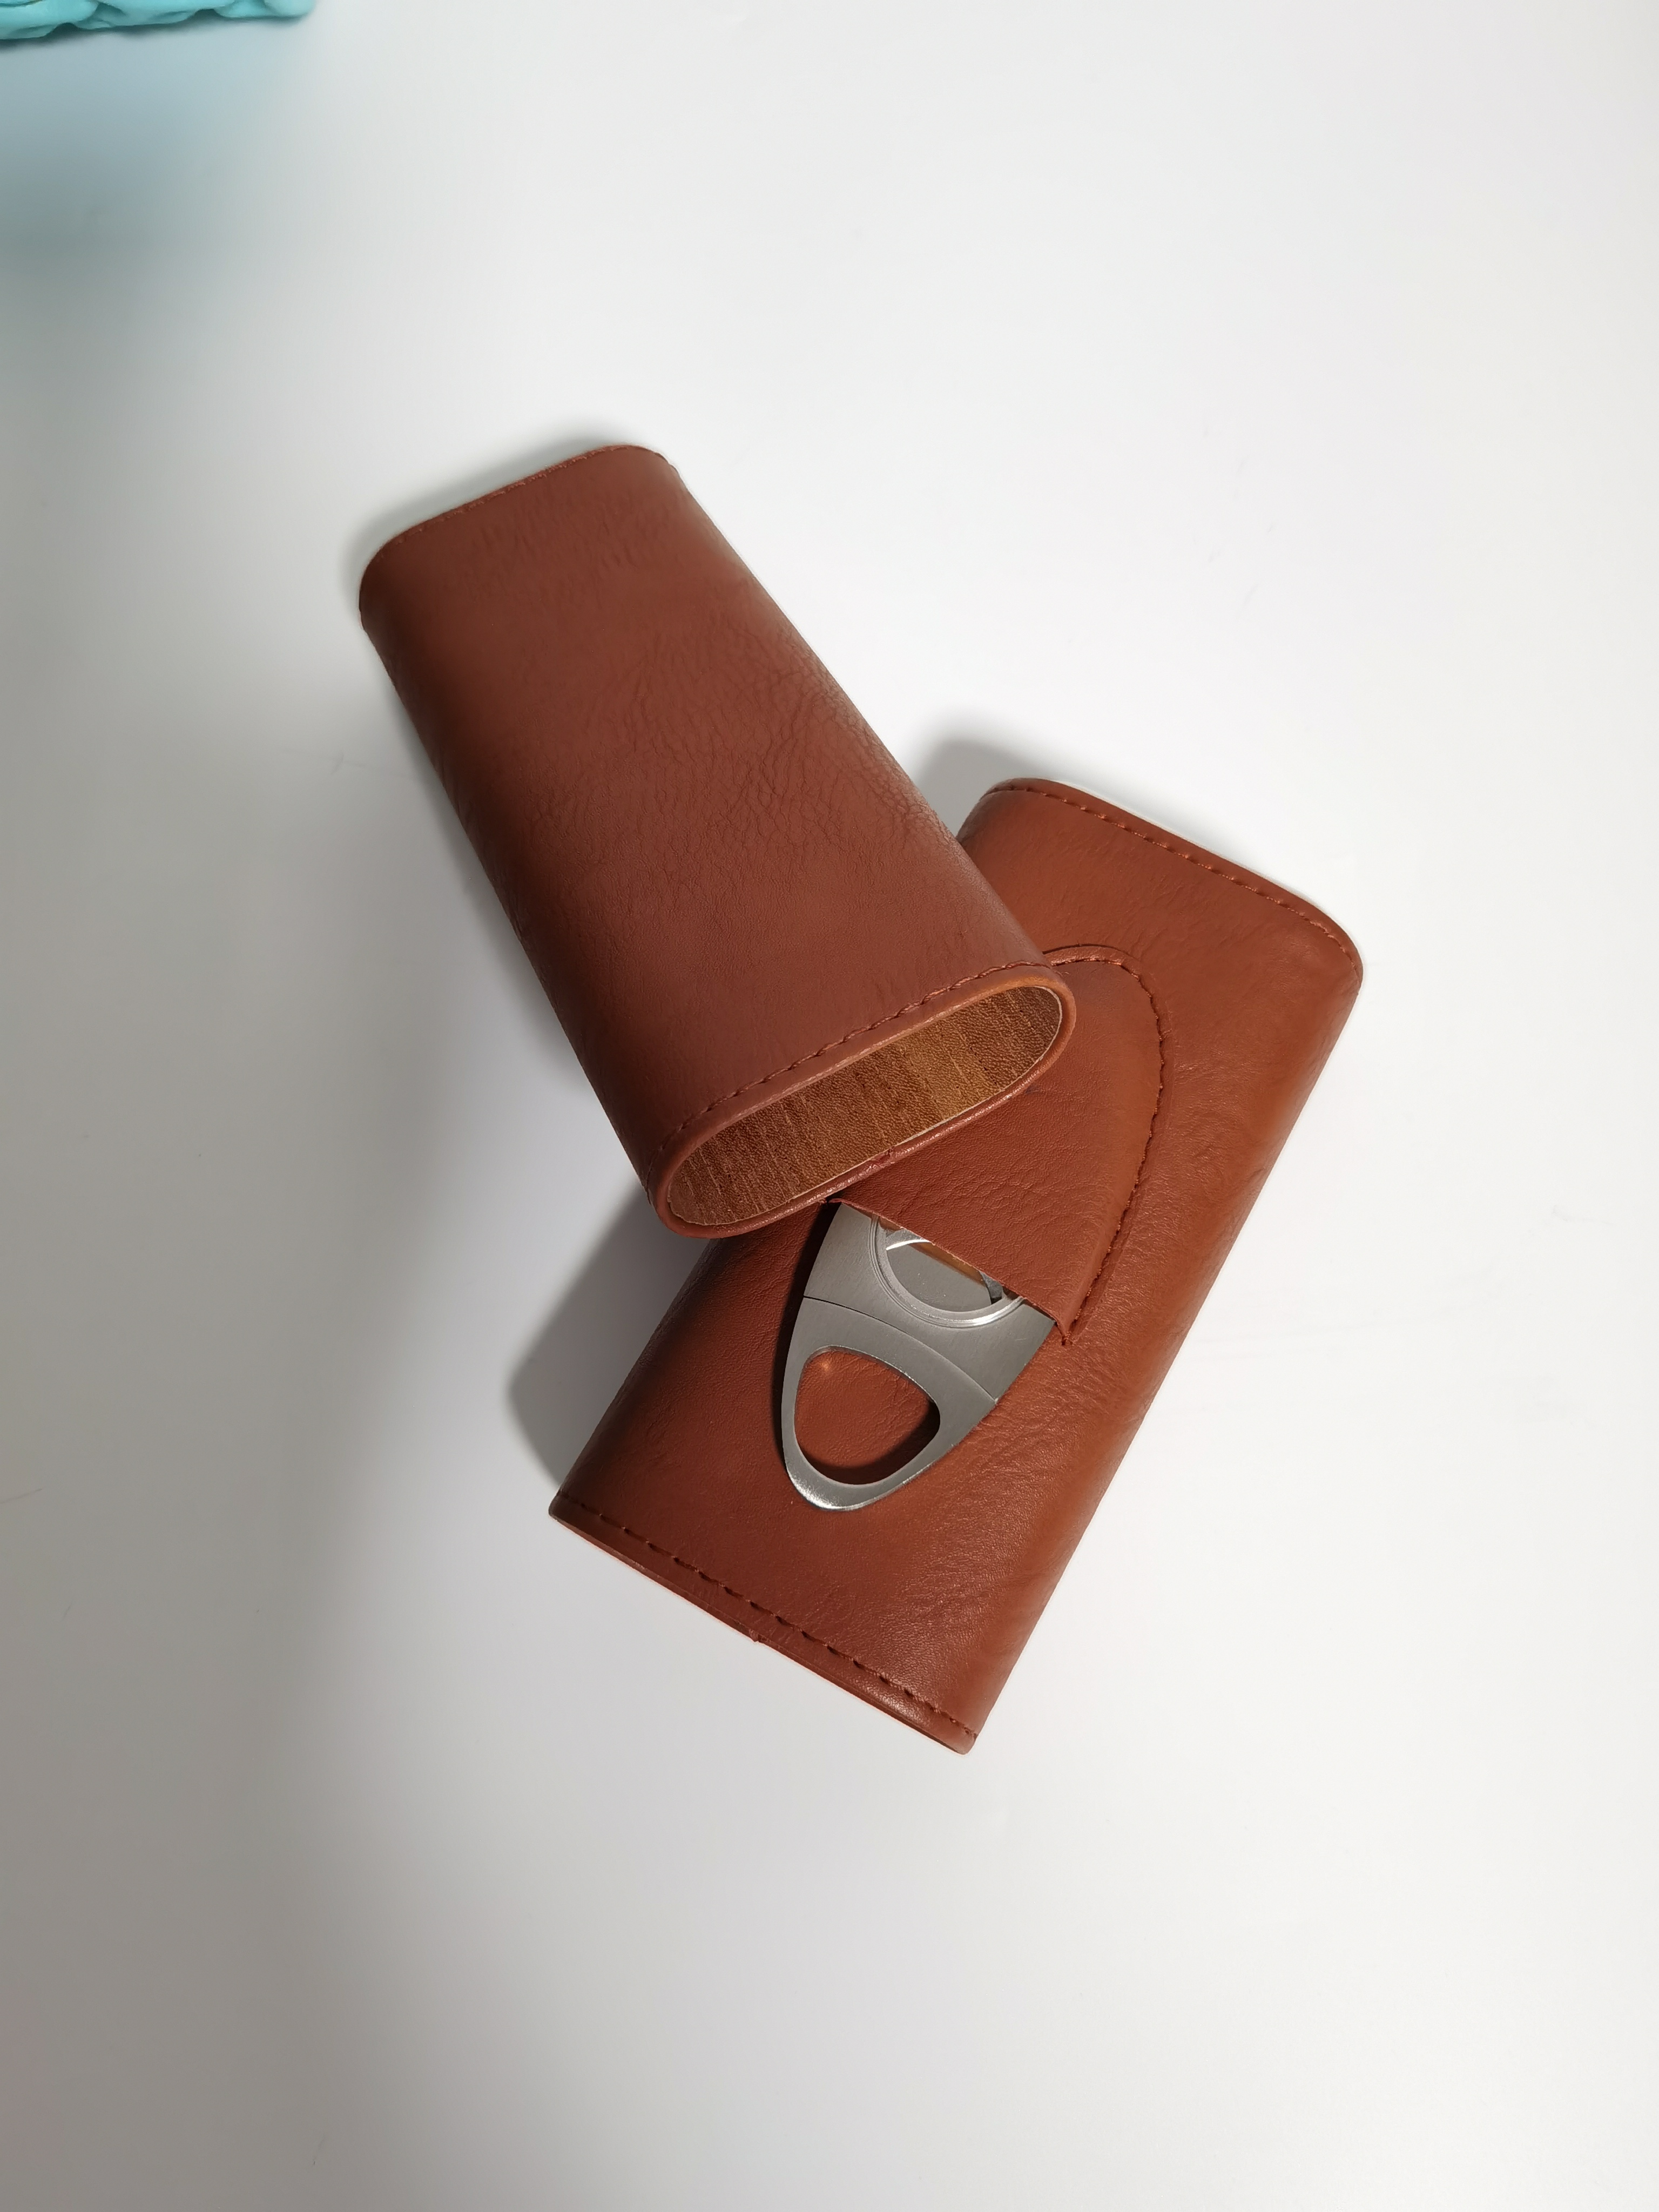  High Quality leather case 5